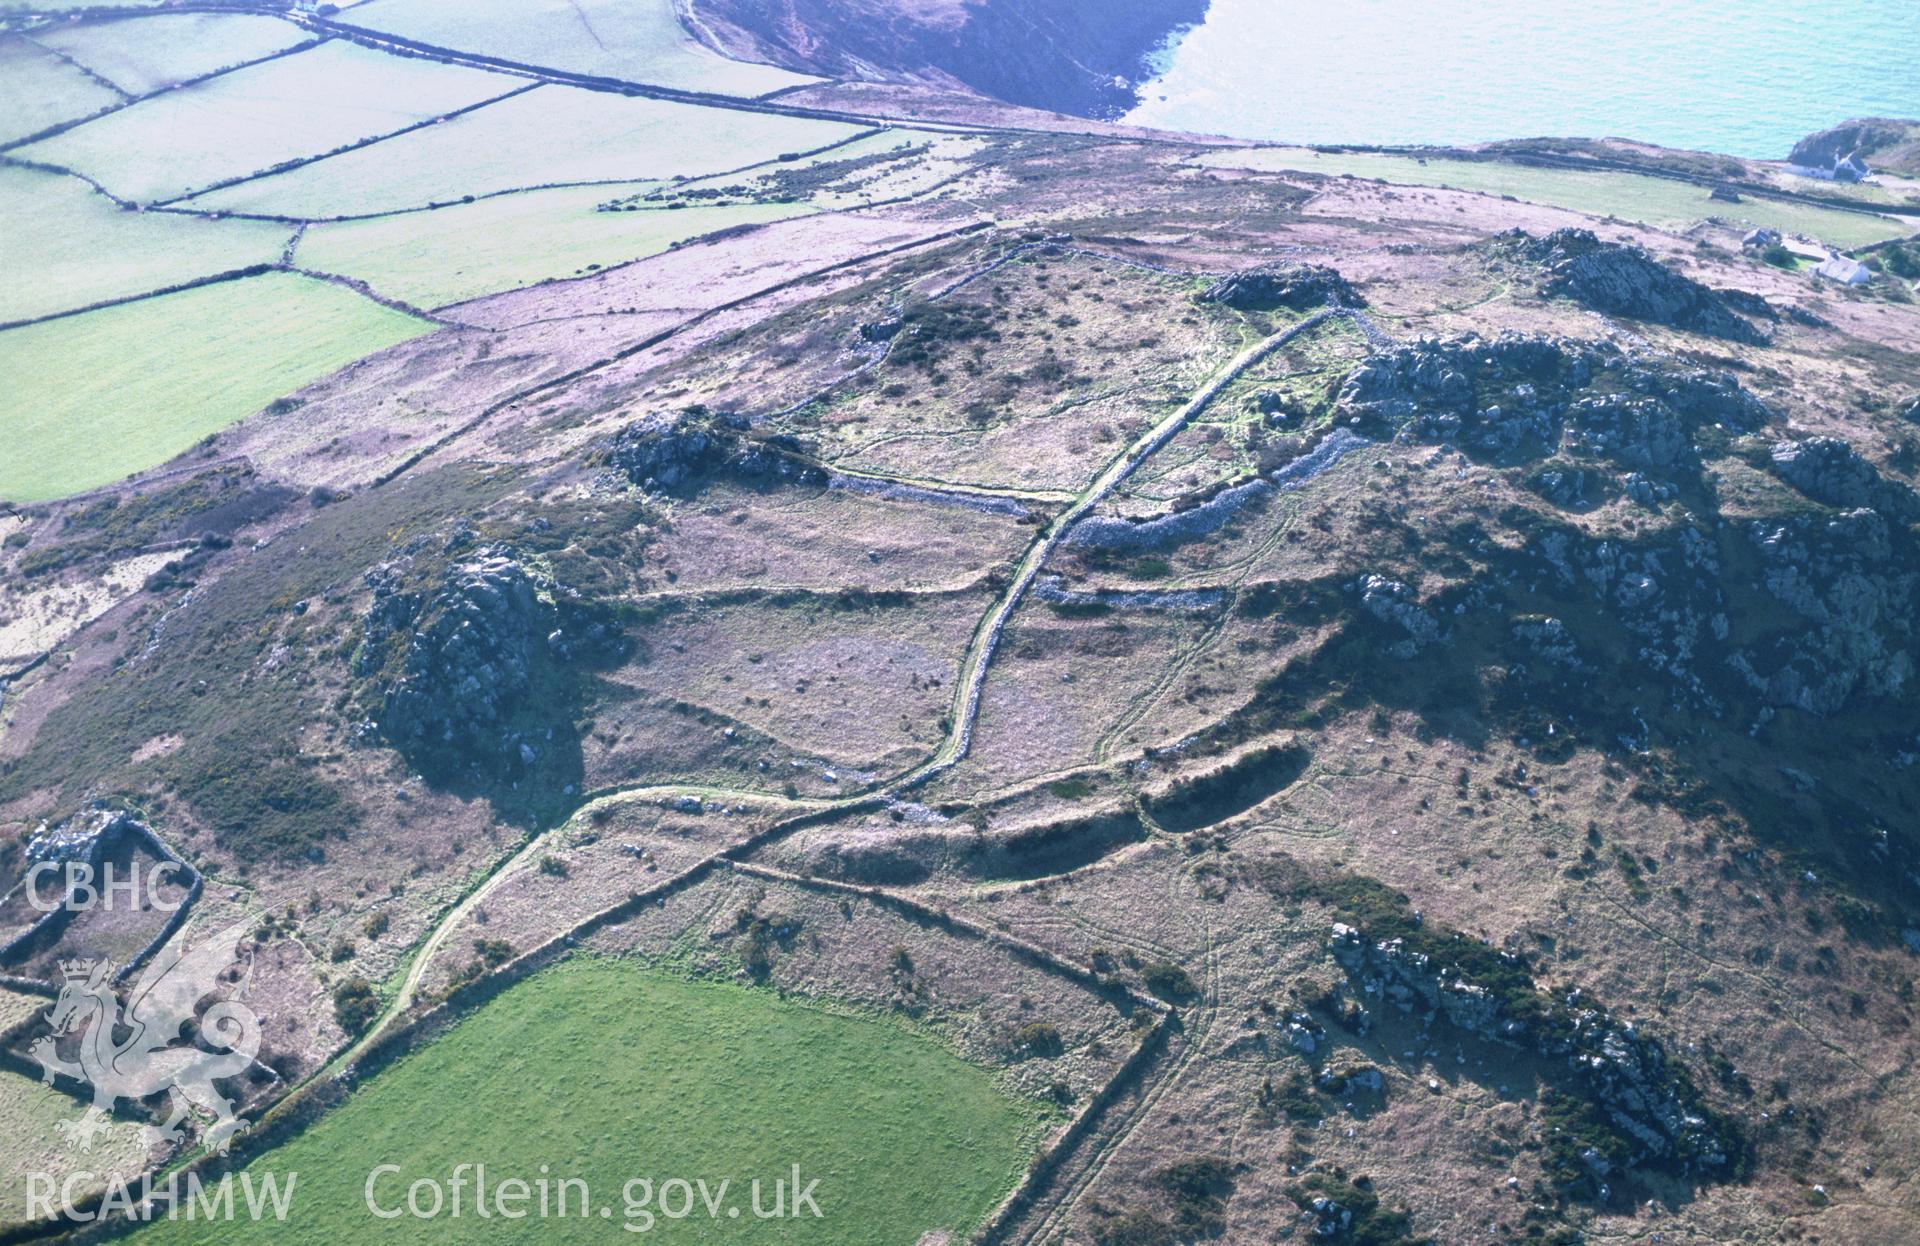 Slide of RCAHMW colour oblique aerial photograph of Garn Fawr Defended Enclosure taken by T.G. Driver, 2002.